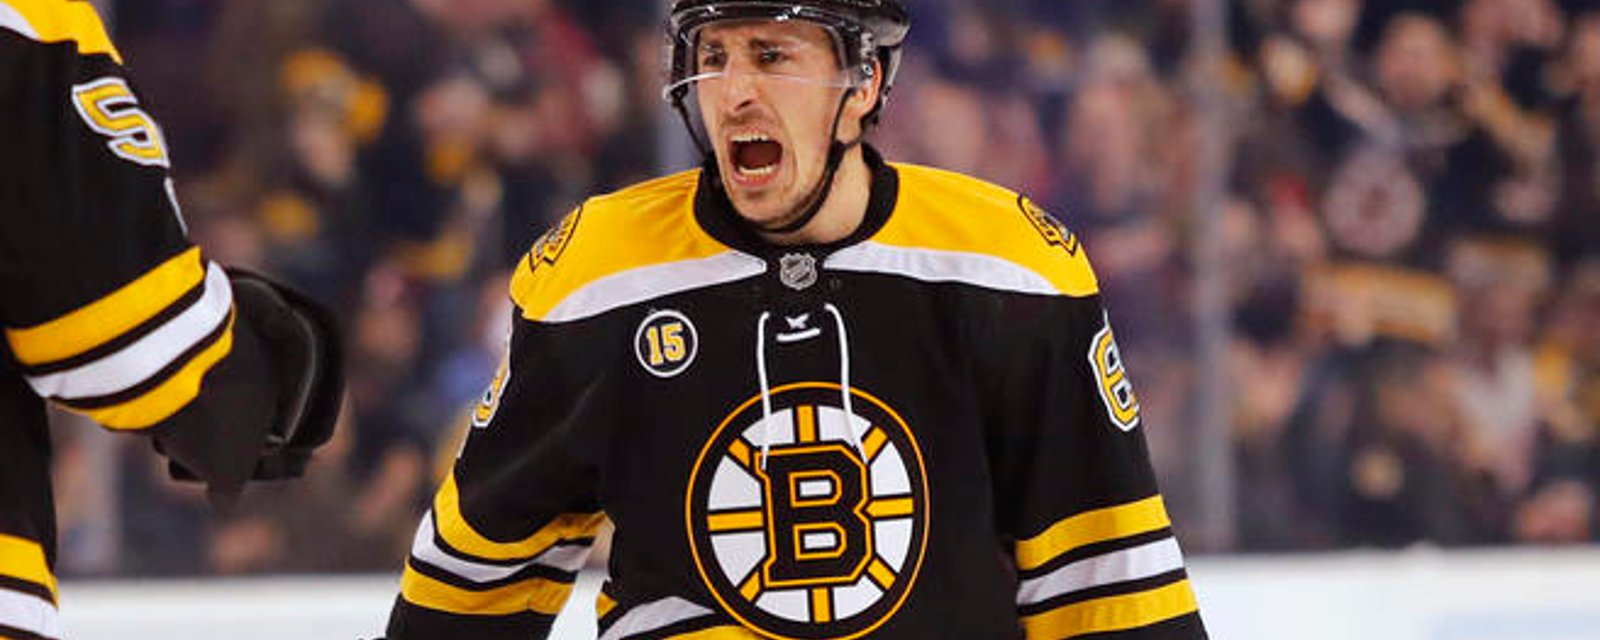 Marchand gets locked in a closet in China